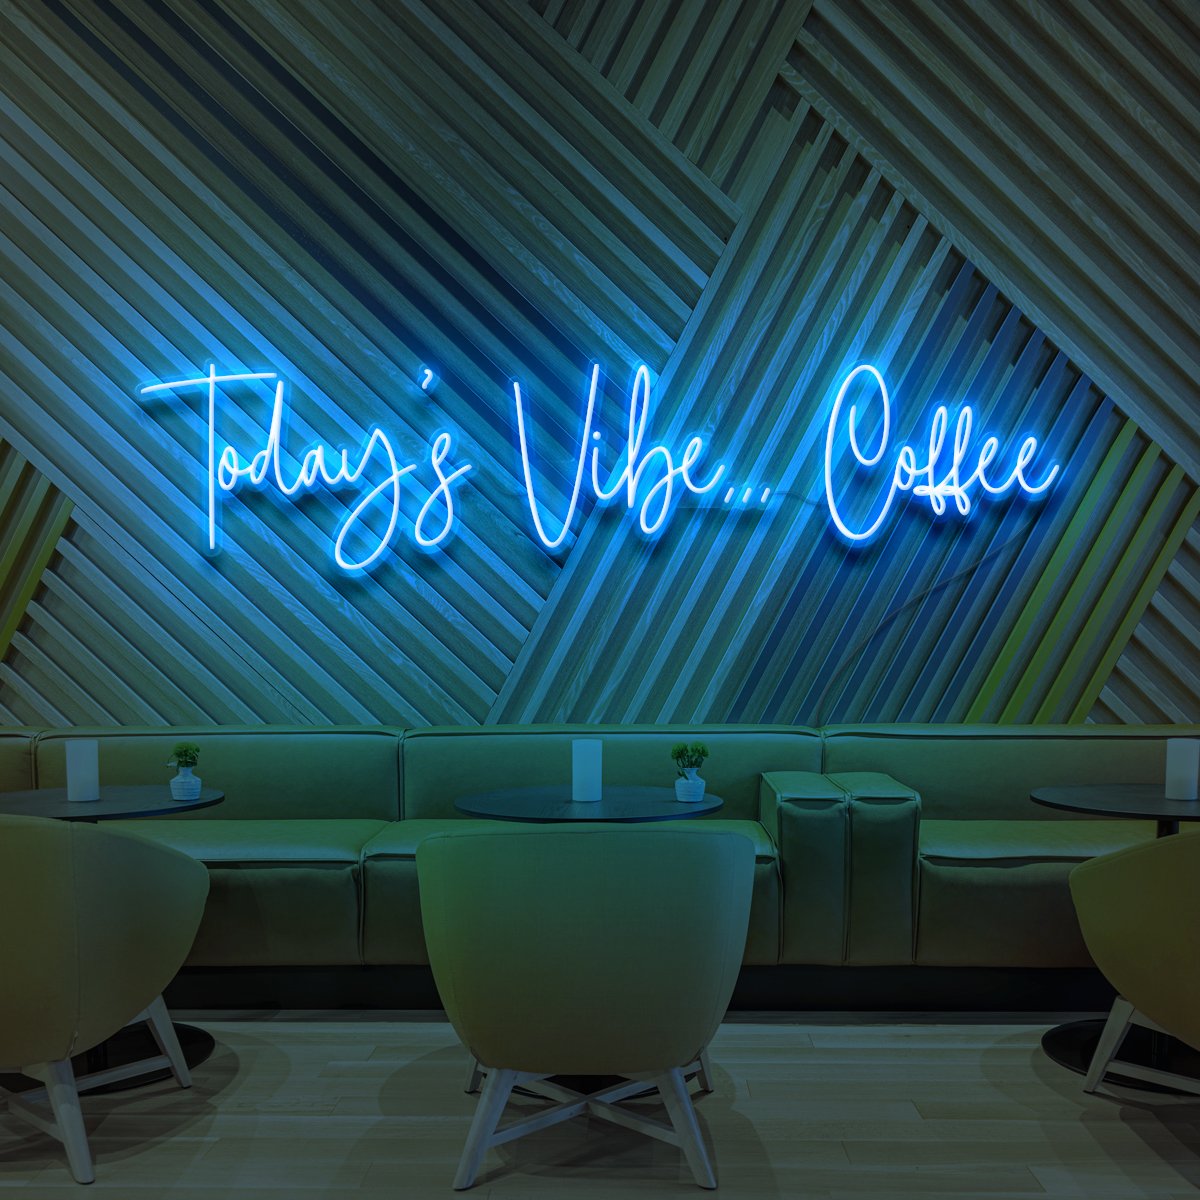 "Today's Vibe... Coffee" Neon Sign for Cafés 90cm (3ft) / Ice Blue / LED Neon by Neon Icons